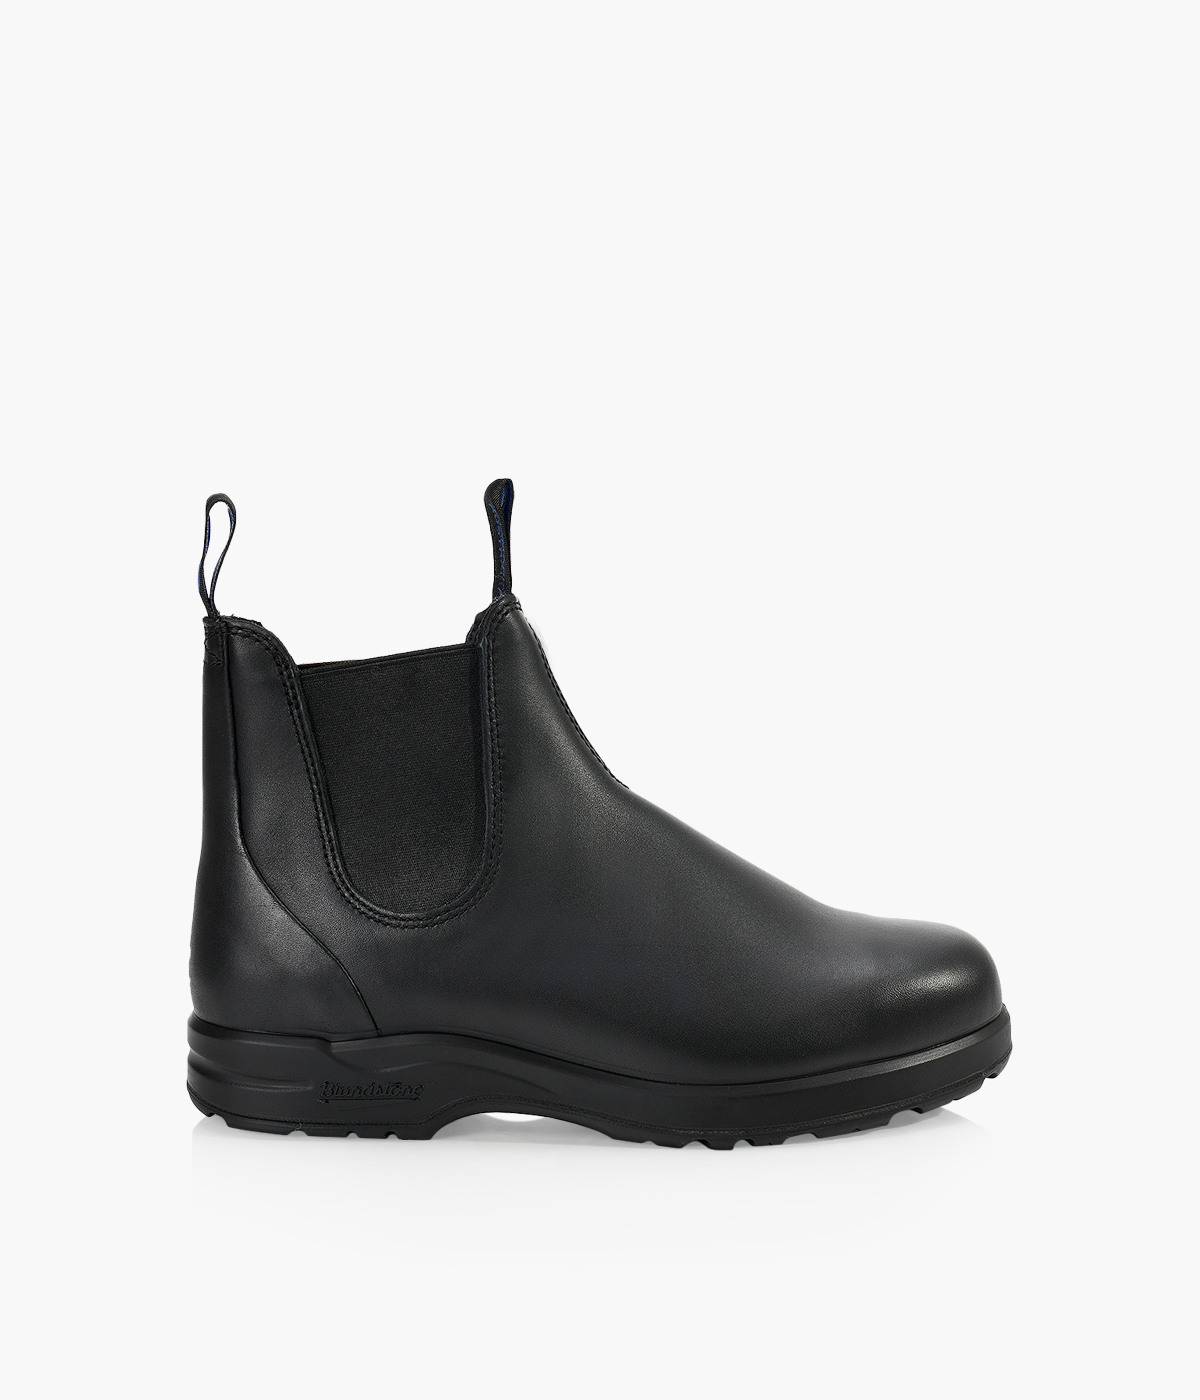 BLUNDSTONE WINTER THERMAL TERRAIN 2241 - Black Patent Leather | Browns ...